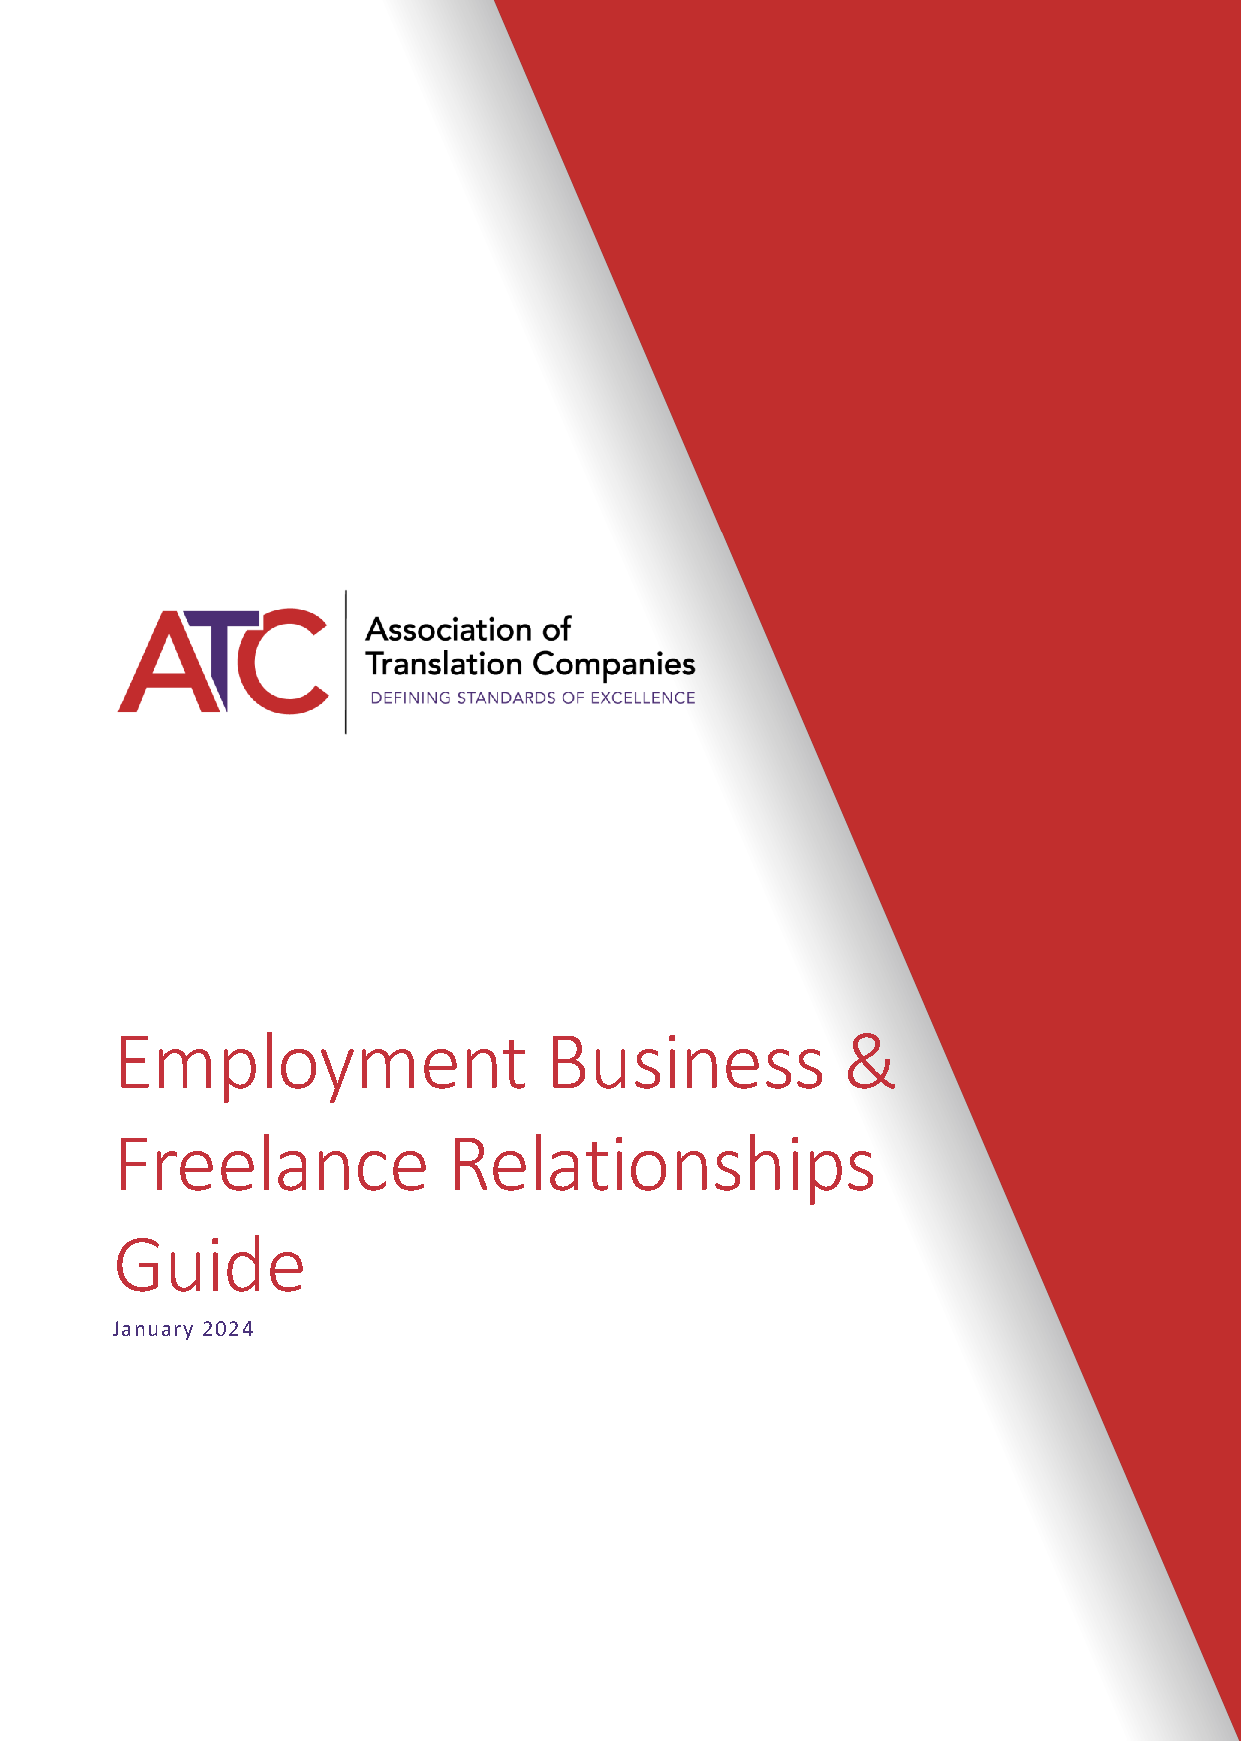 ATC Employment Business & Relationships Guide January 2023